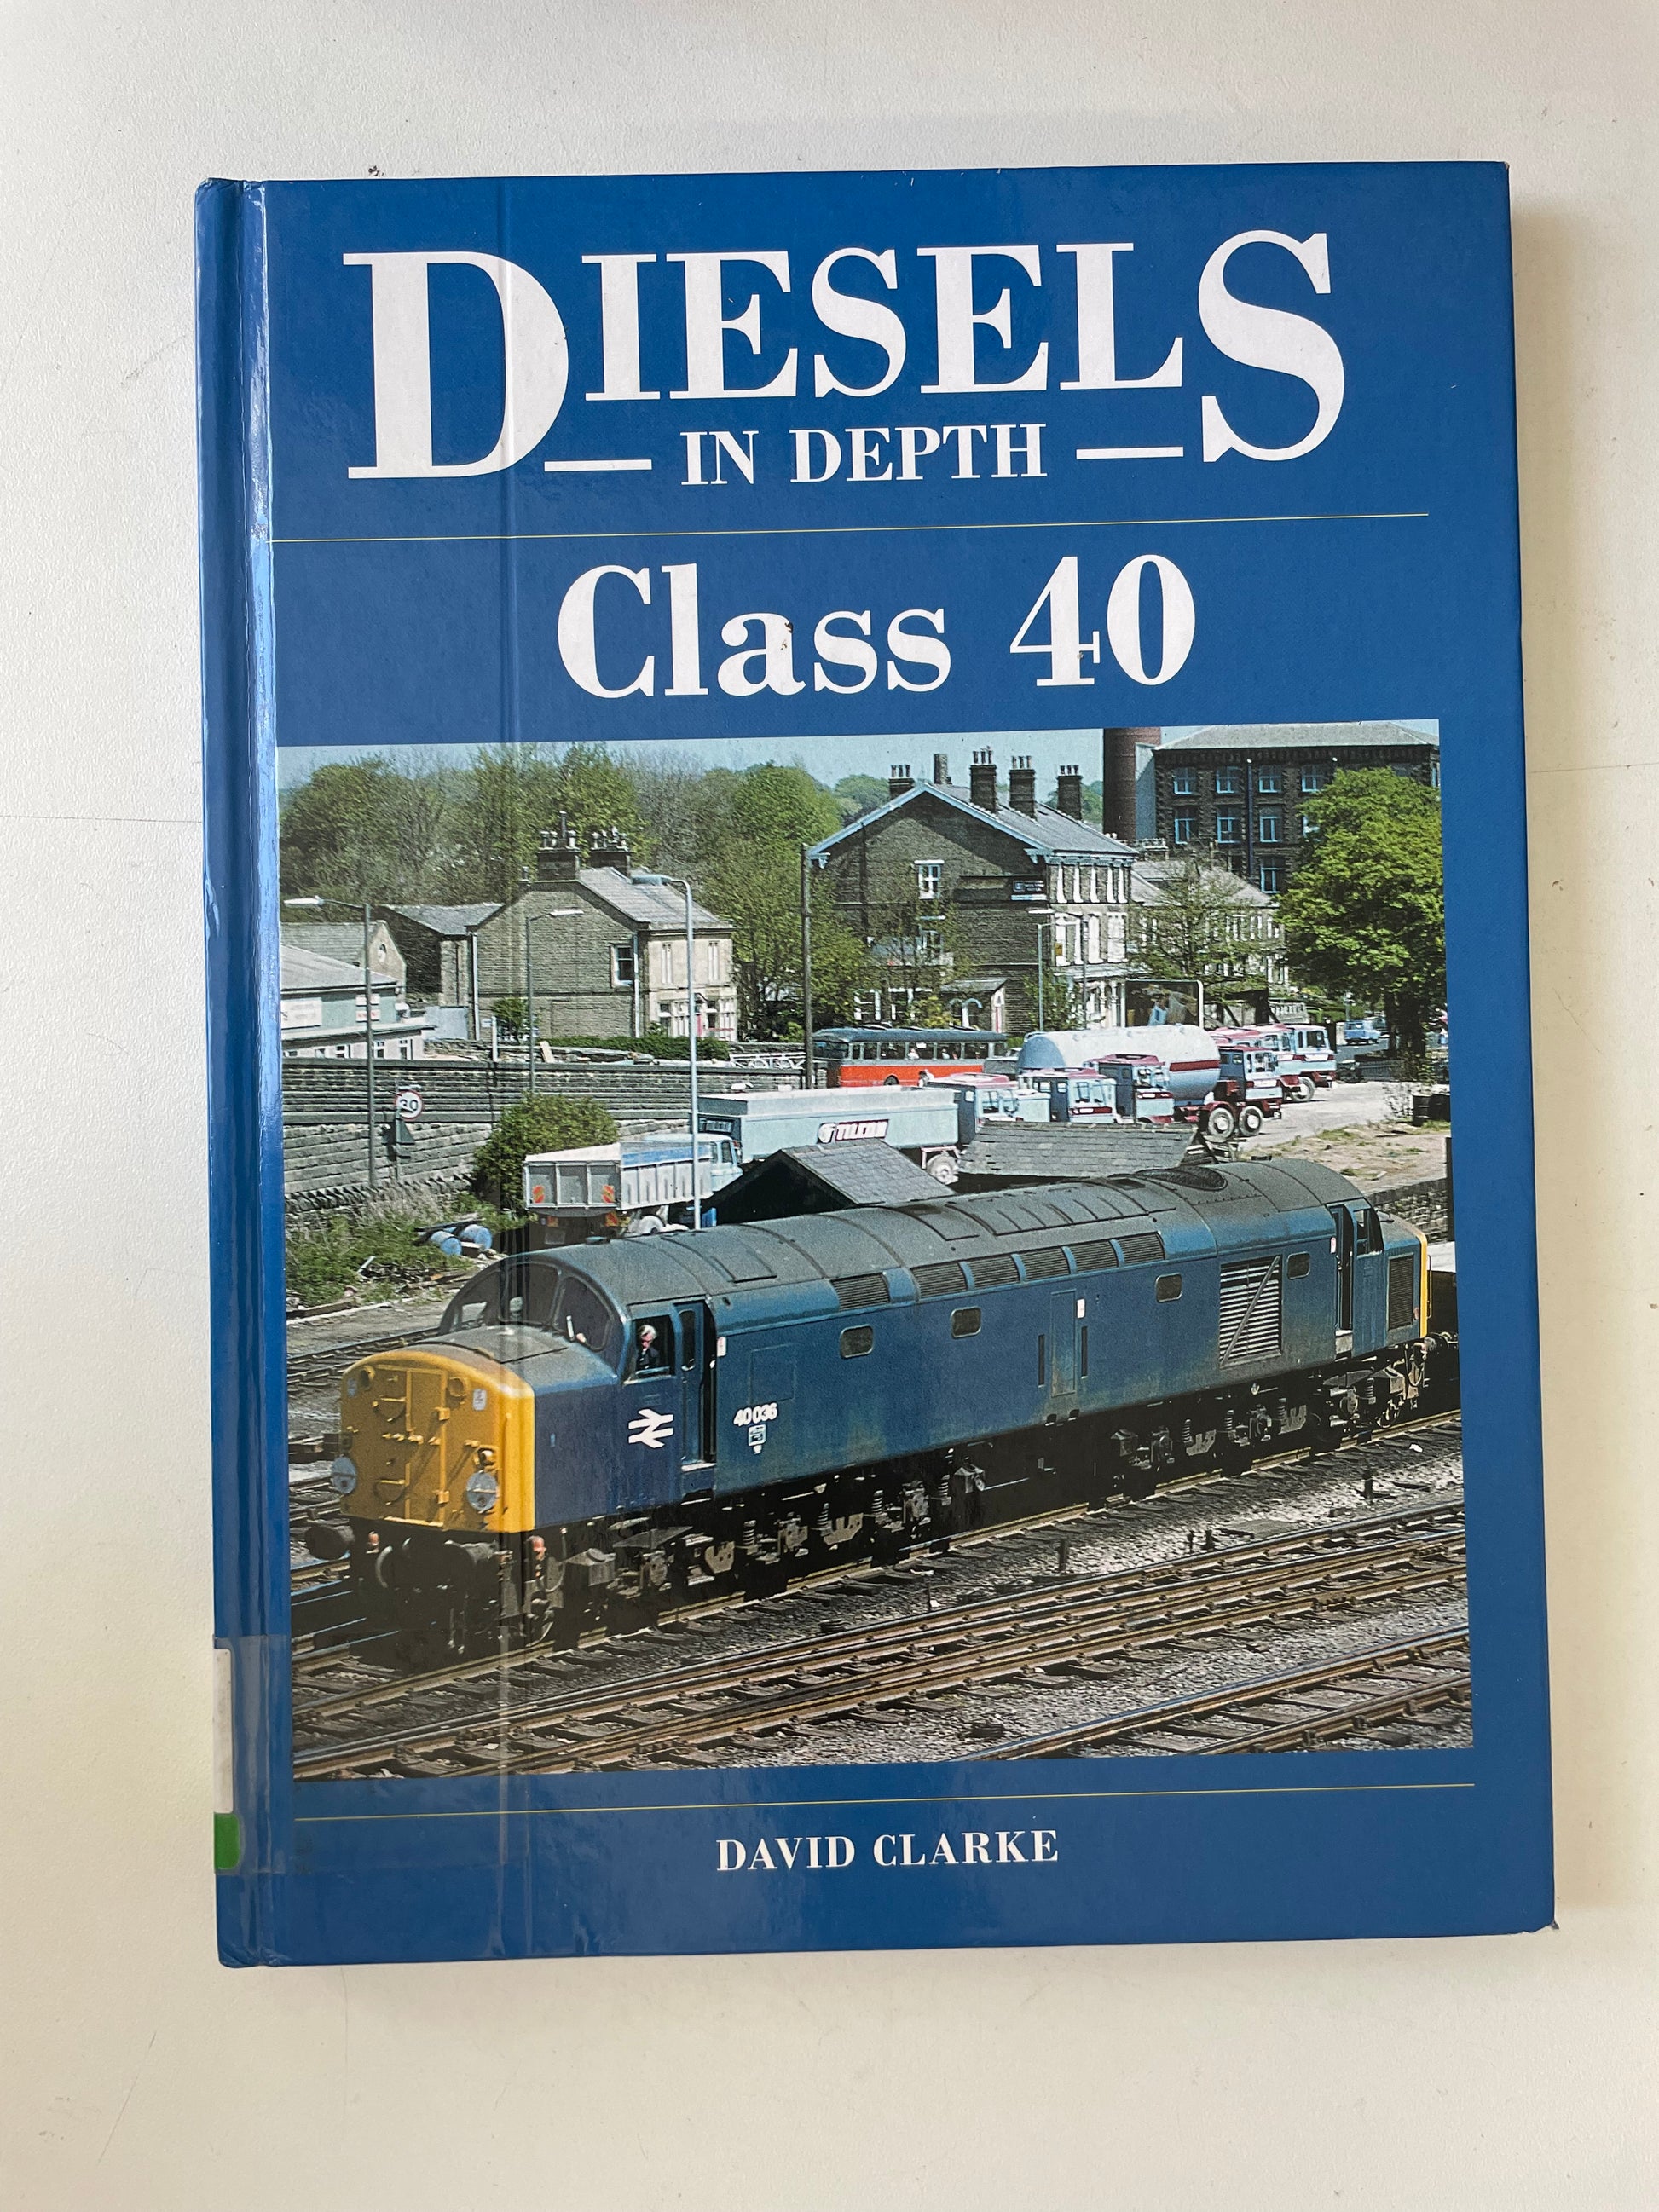 Diesels In Depth - Class 40 by David Clarke - Chester Model Centre